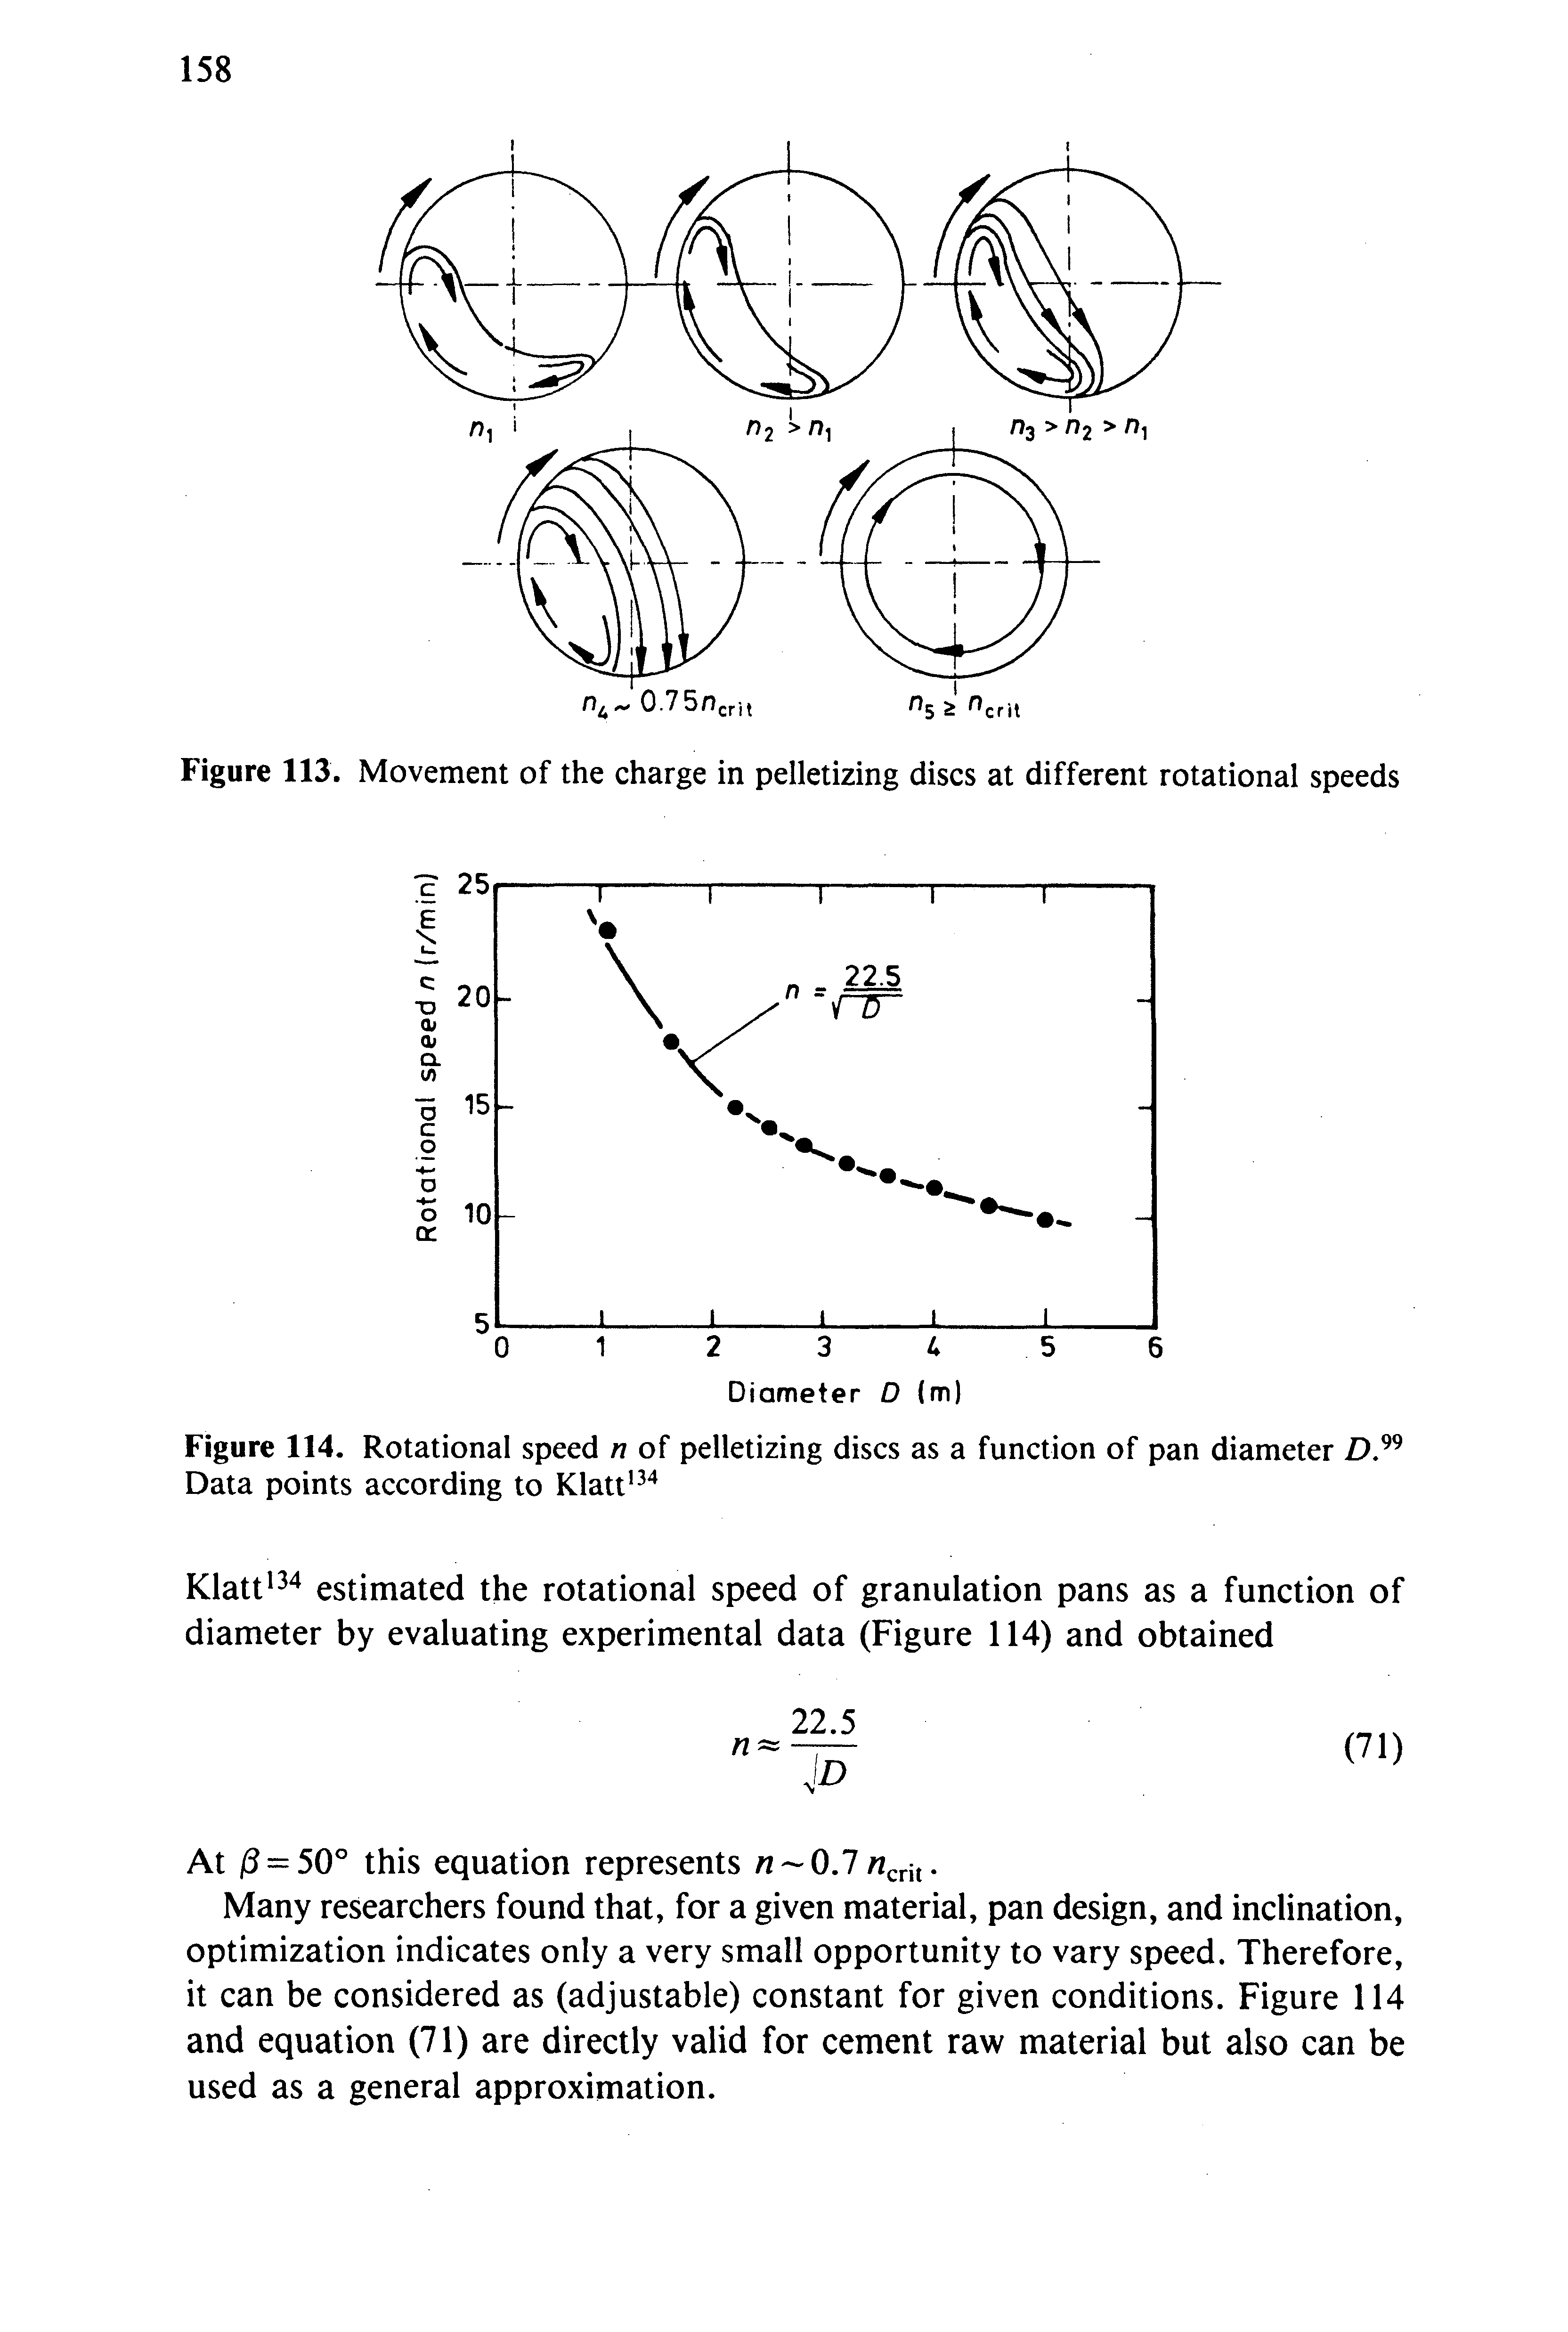 Figure 113. Movement of the charge in pelletizing discs at different rotational speeds...